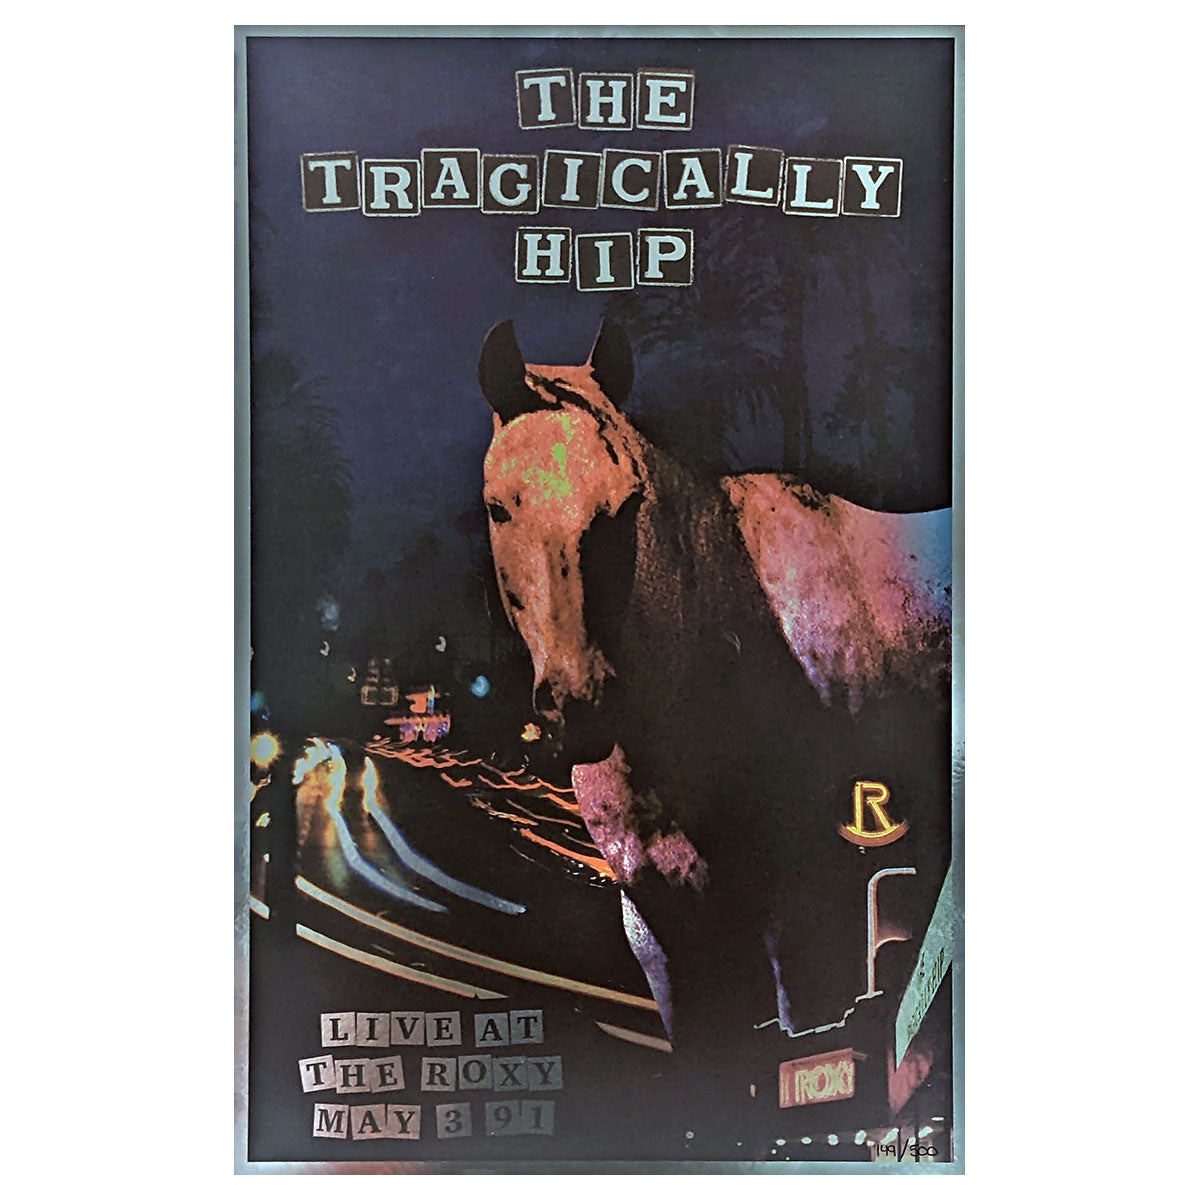 THE TRAGICALLY HIP Live At The Roxy May '91 Poster